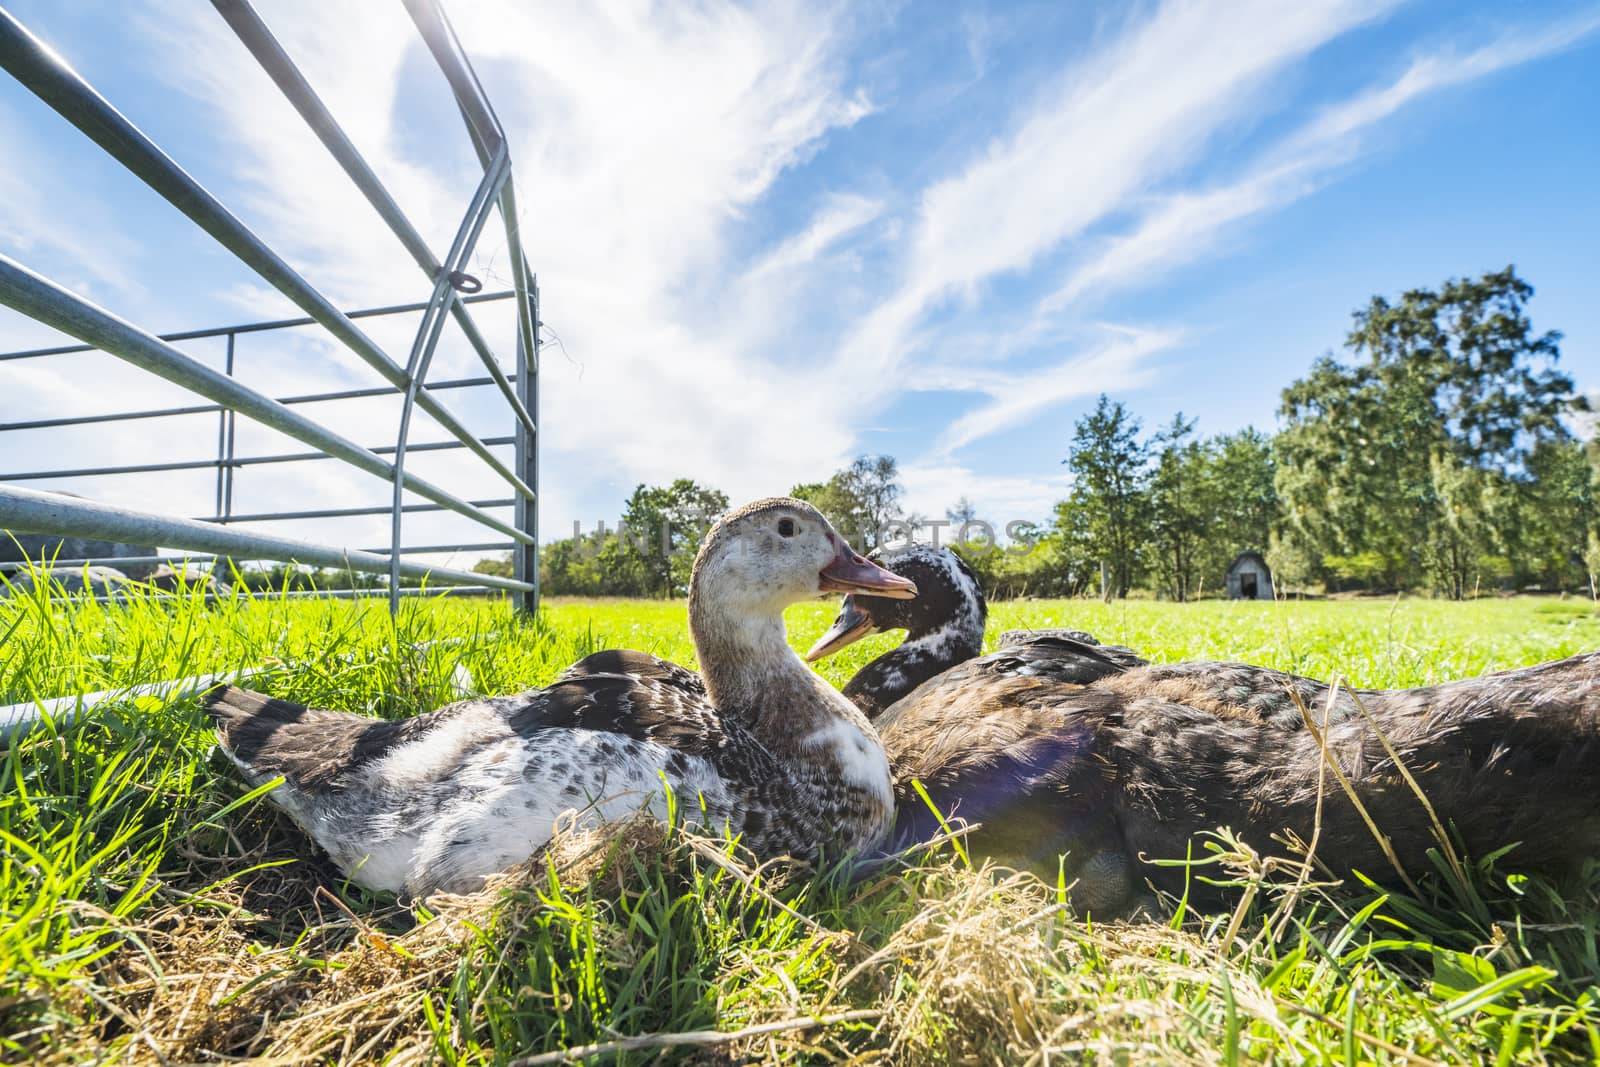 Ducks relaxing in the sun on green grass in the summer by Sportactive